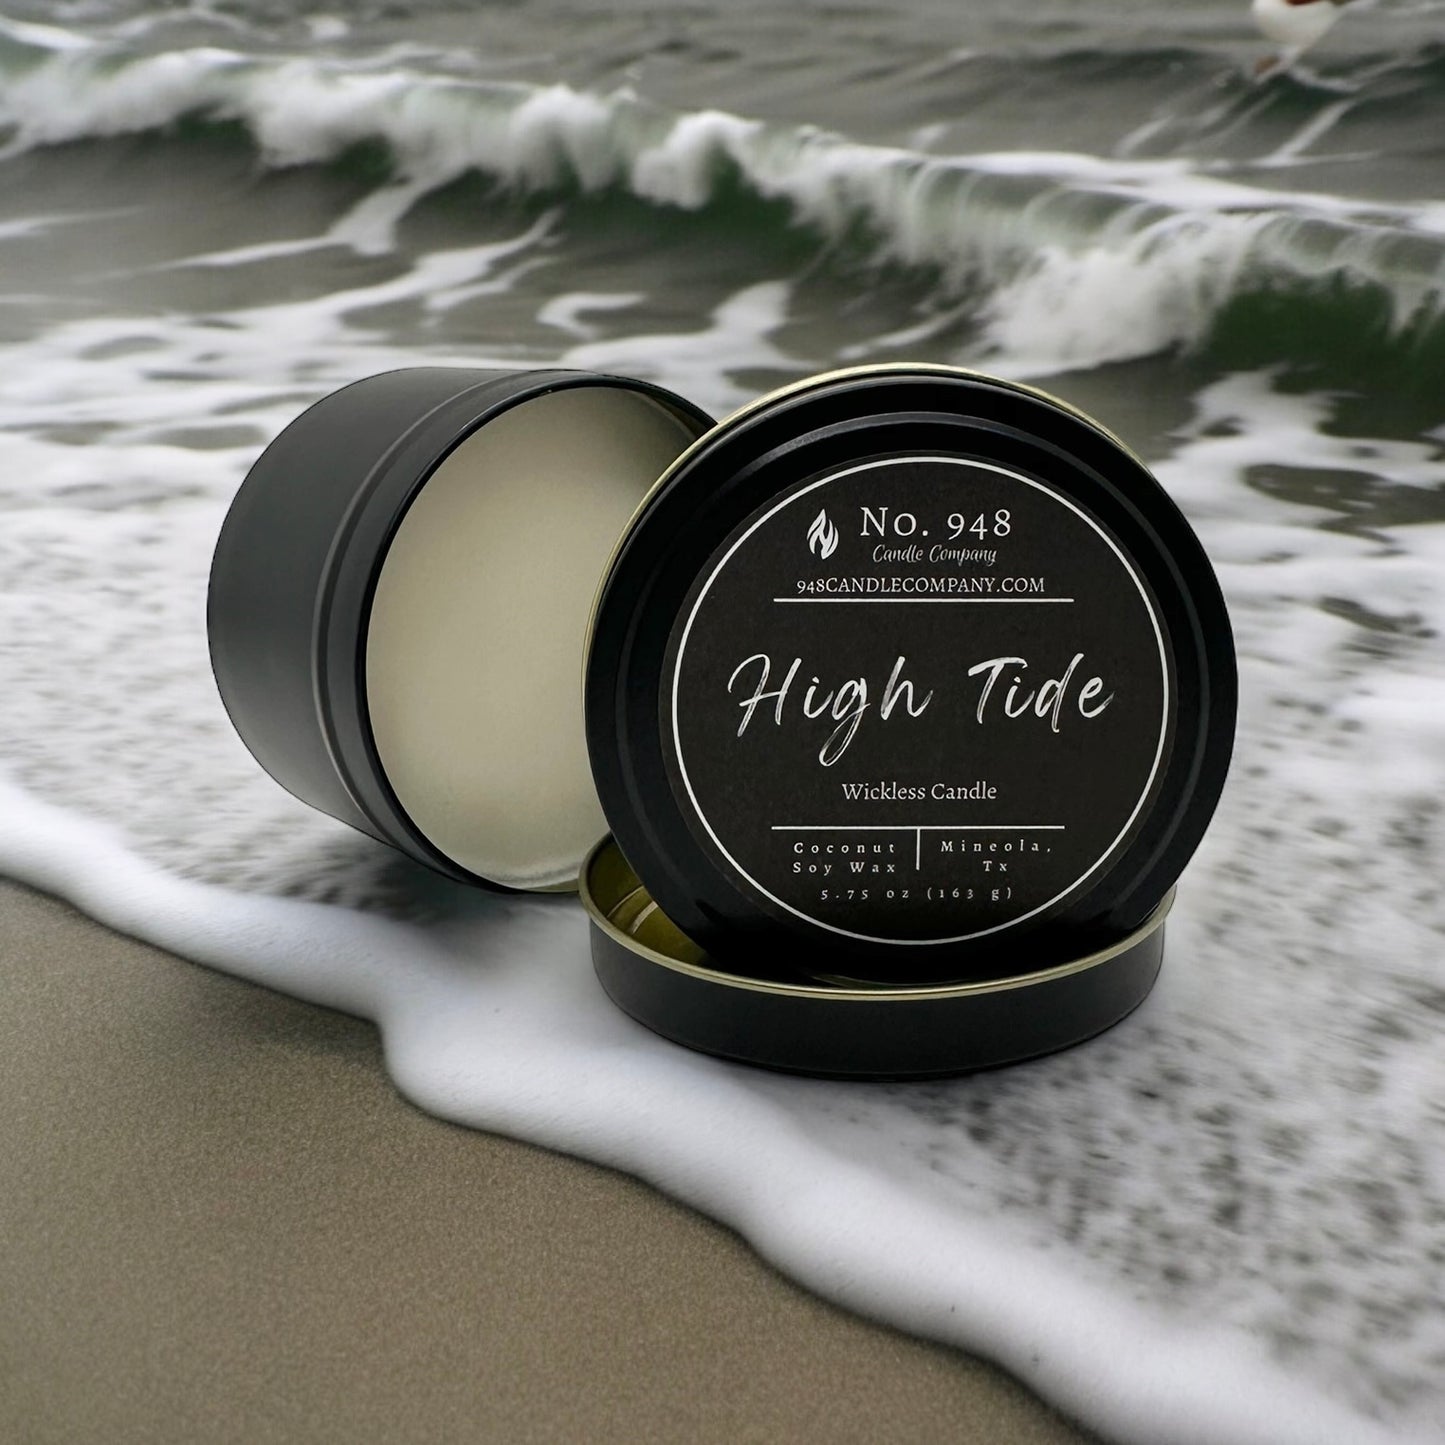 High Tide Wickless Candle